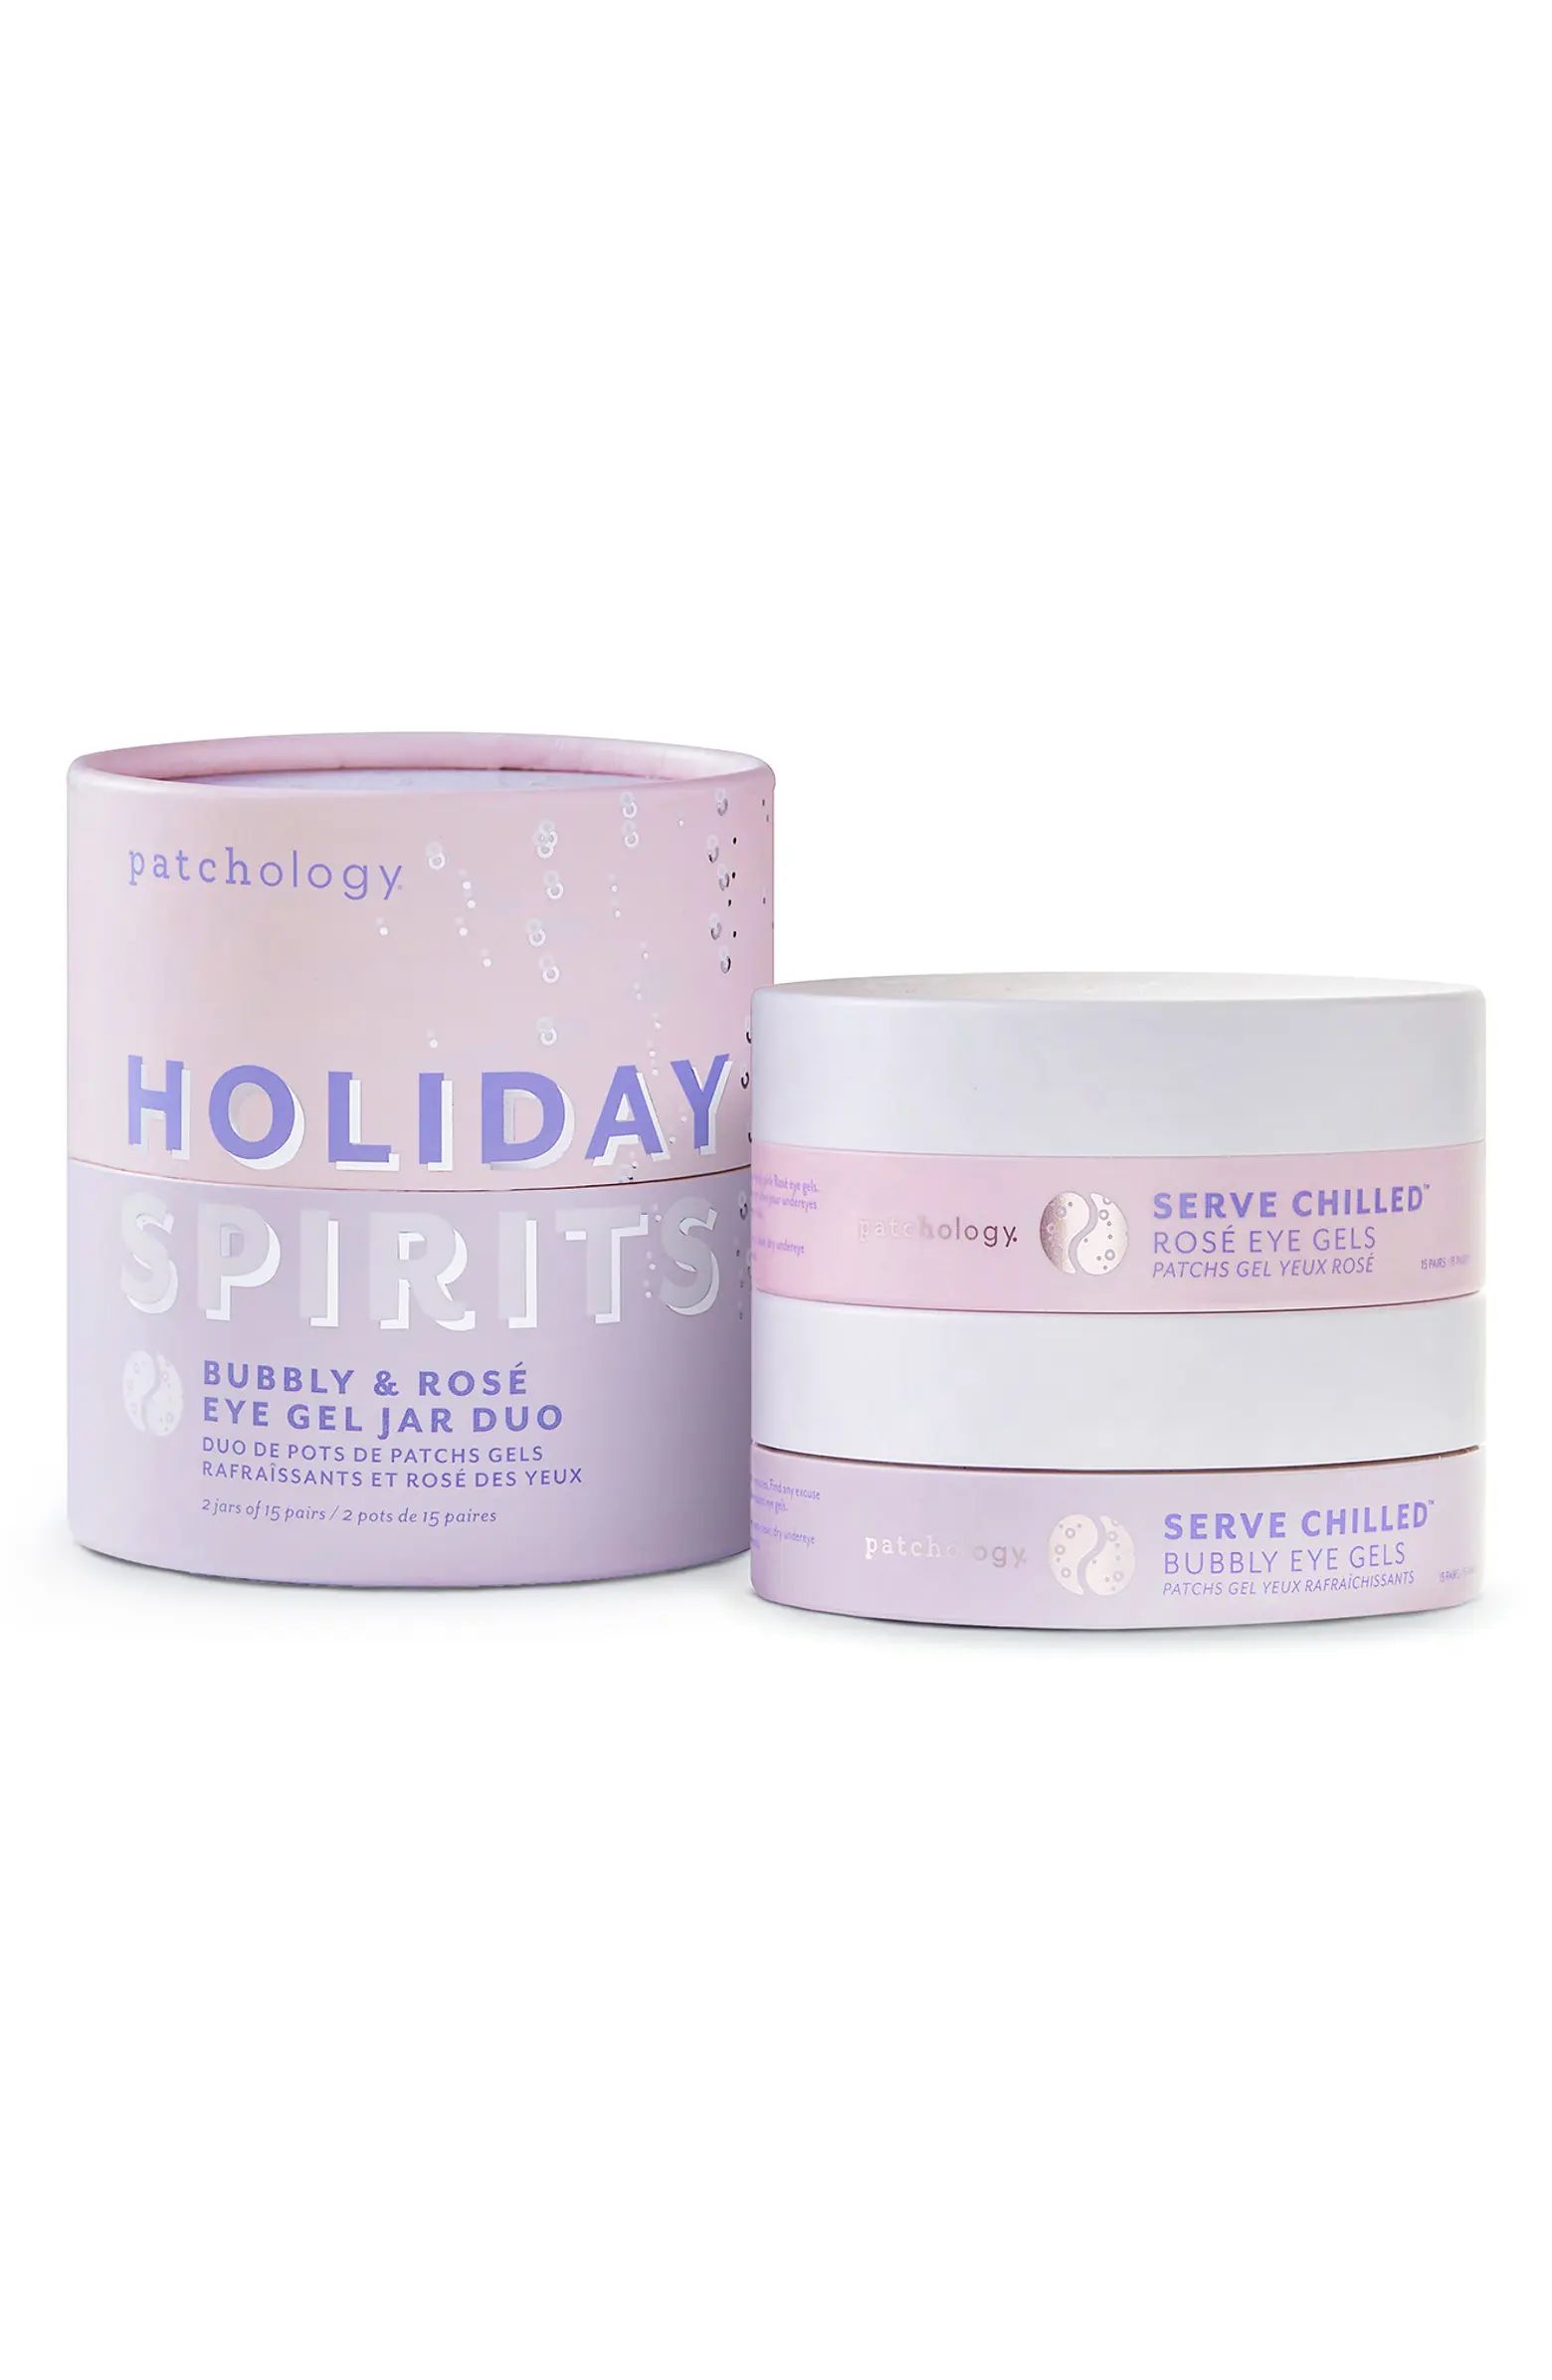 Patchology Holiday Spirits Bubbly & Rosé Eye Gels Duo USD $70 Value | Nordstrom | Nordstrom